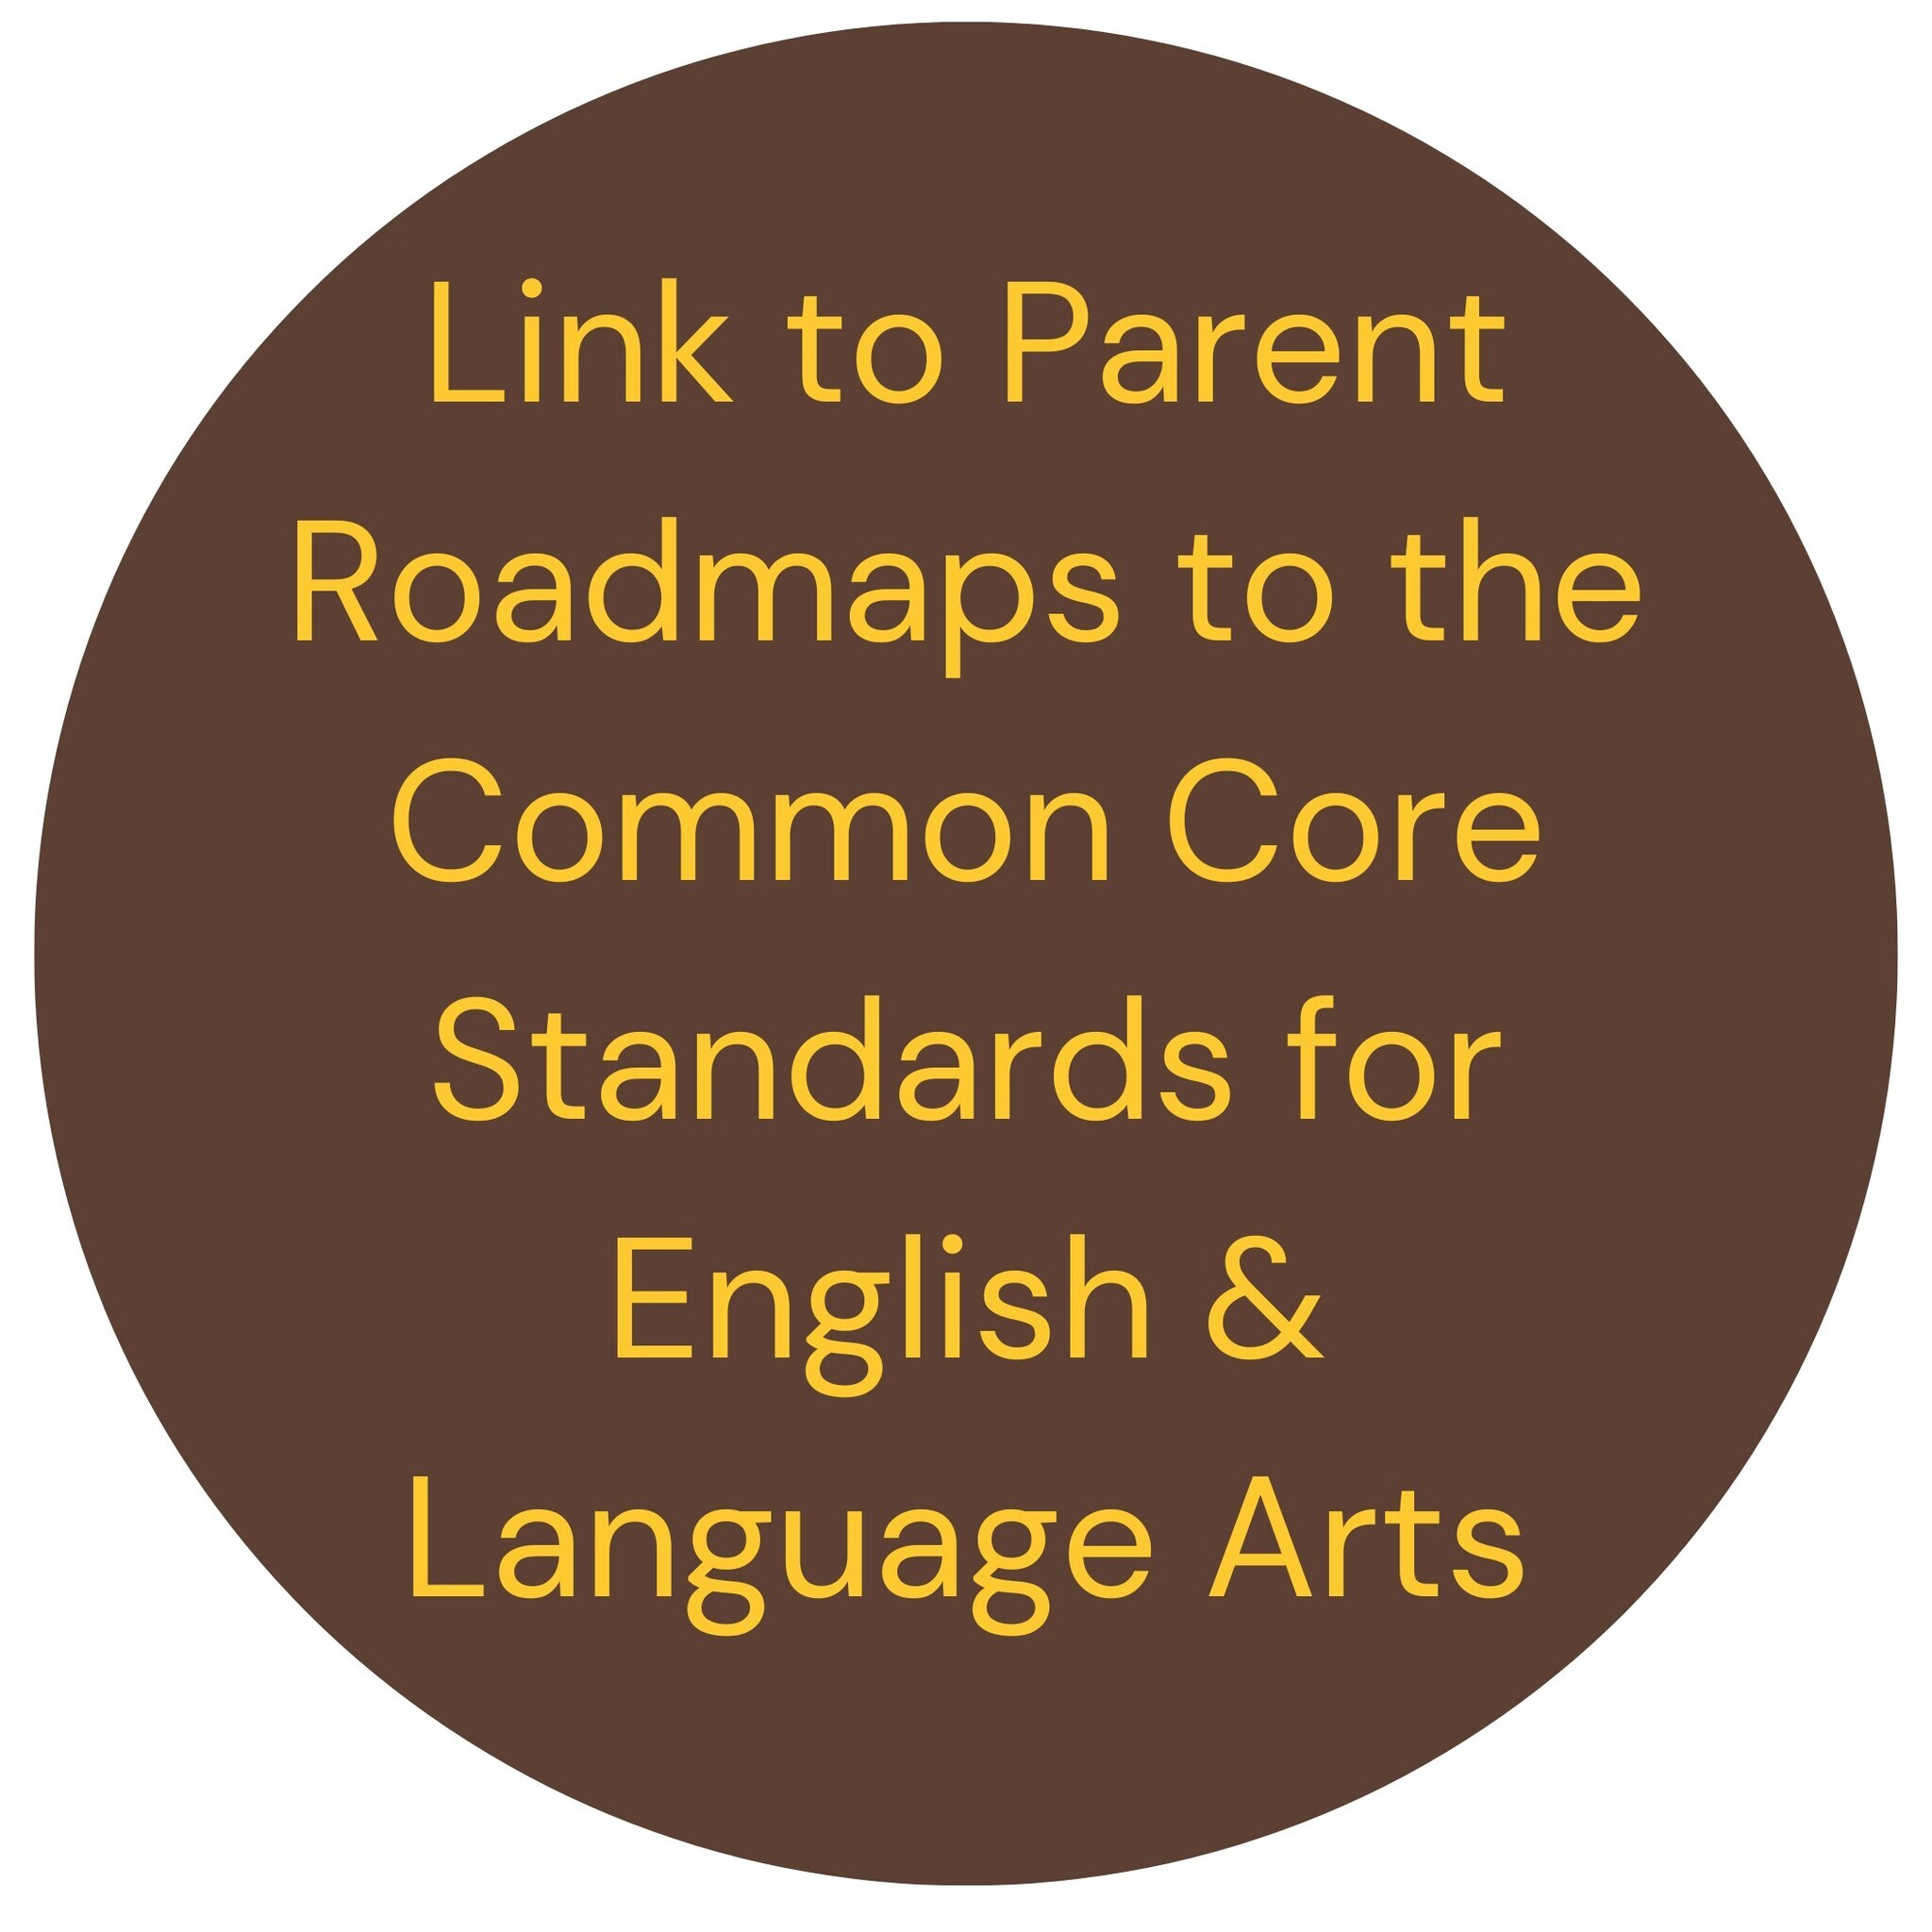 Common Core English and Language Arts Resources for Parents